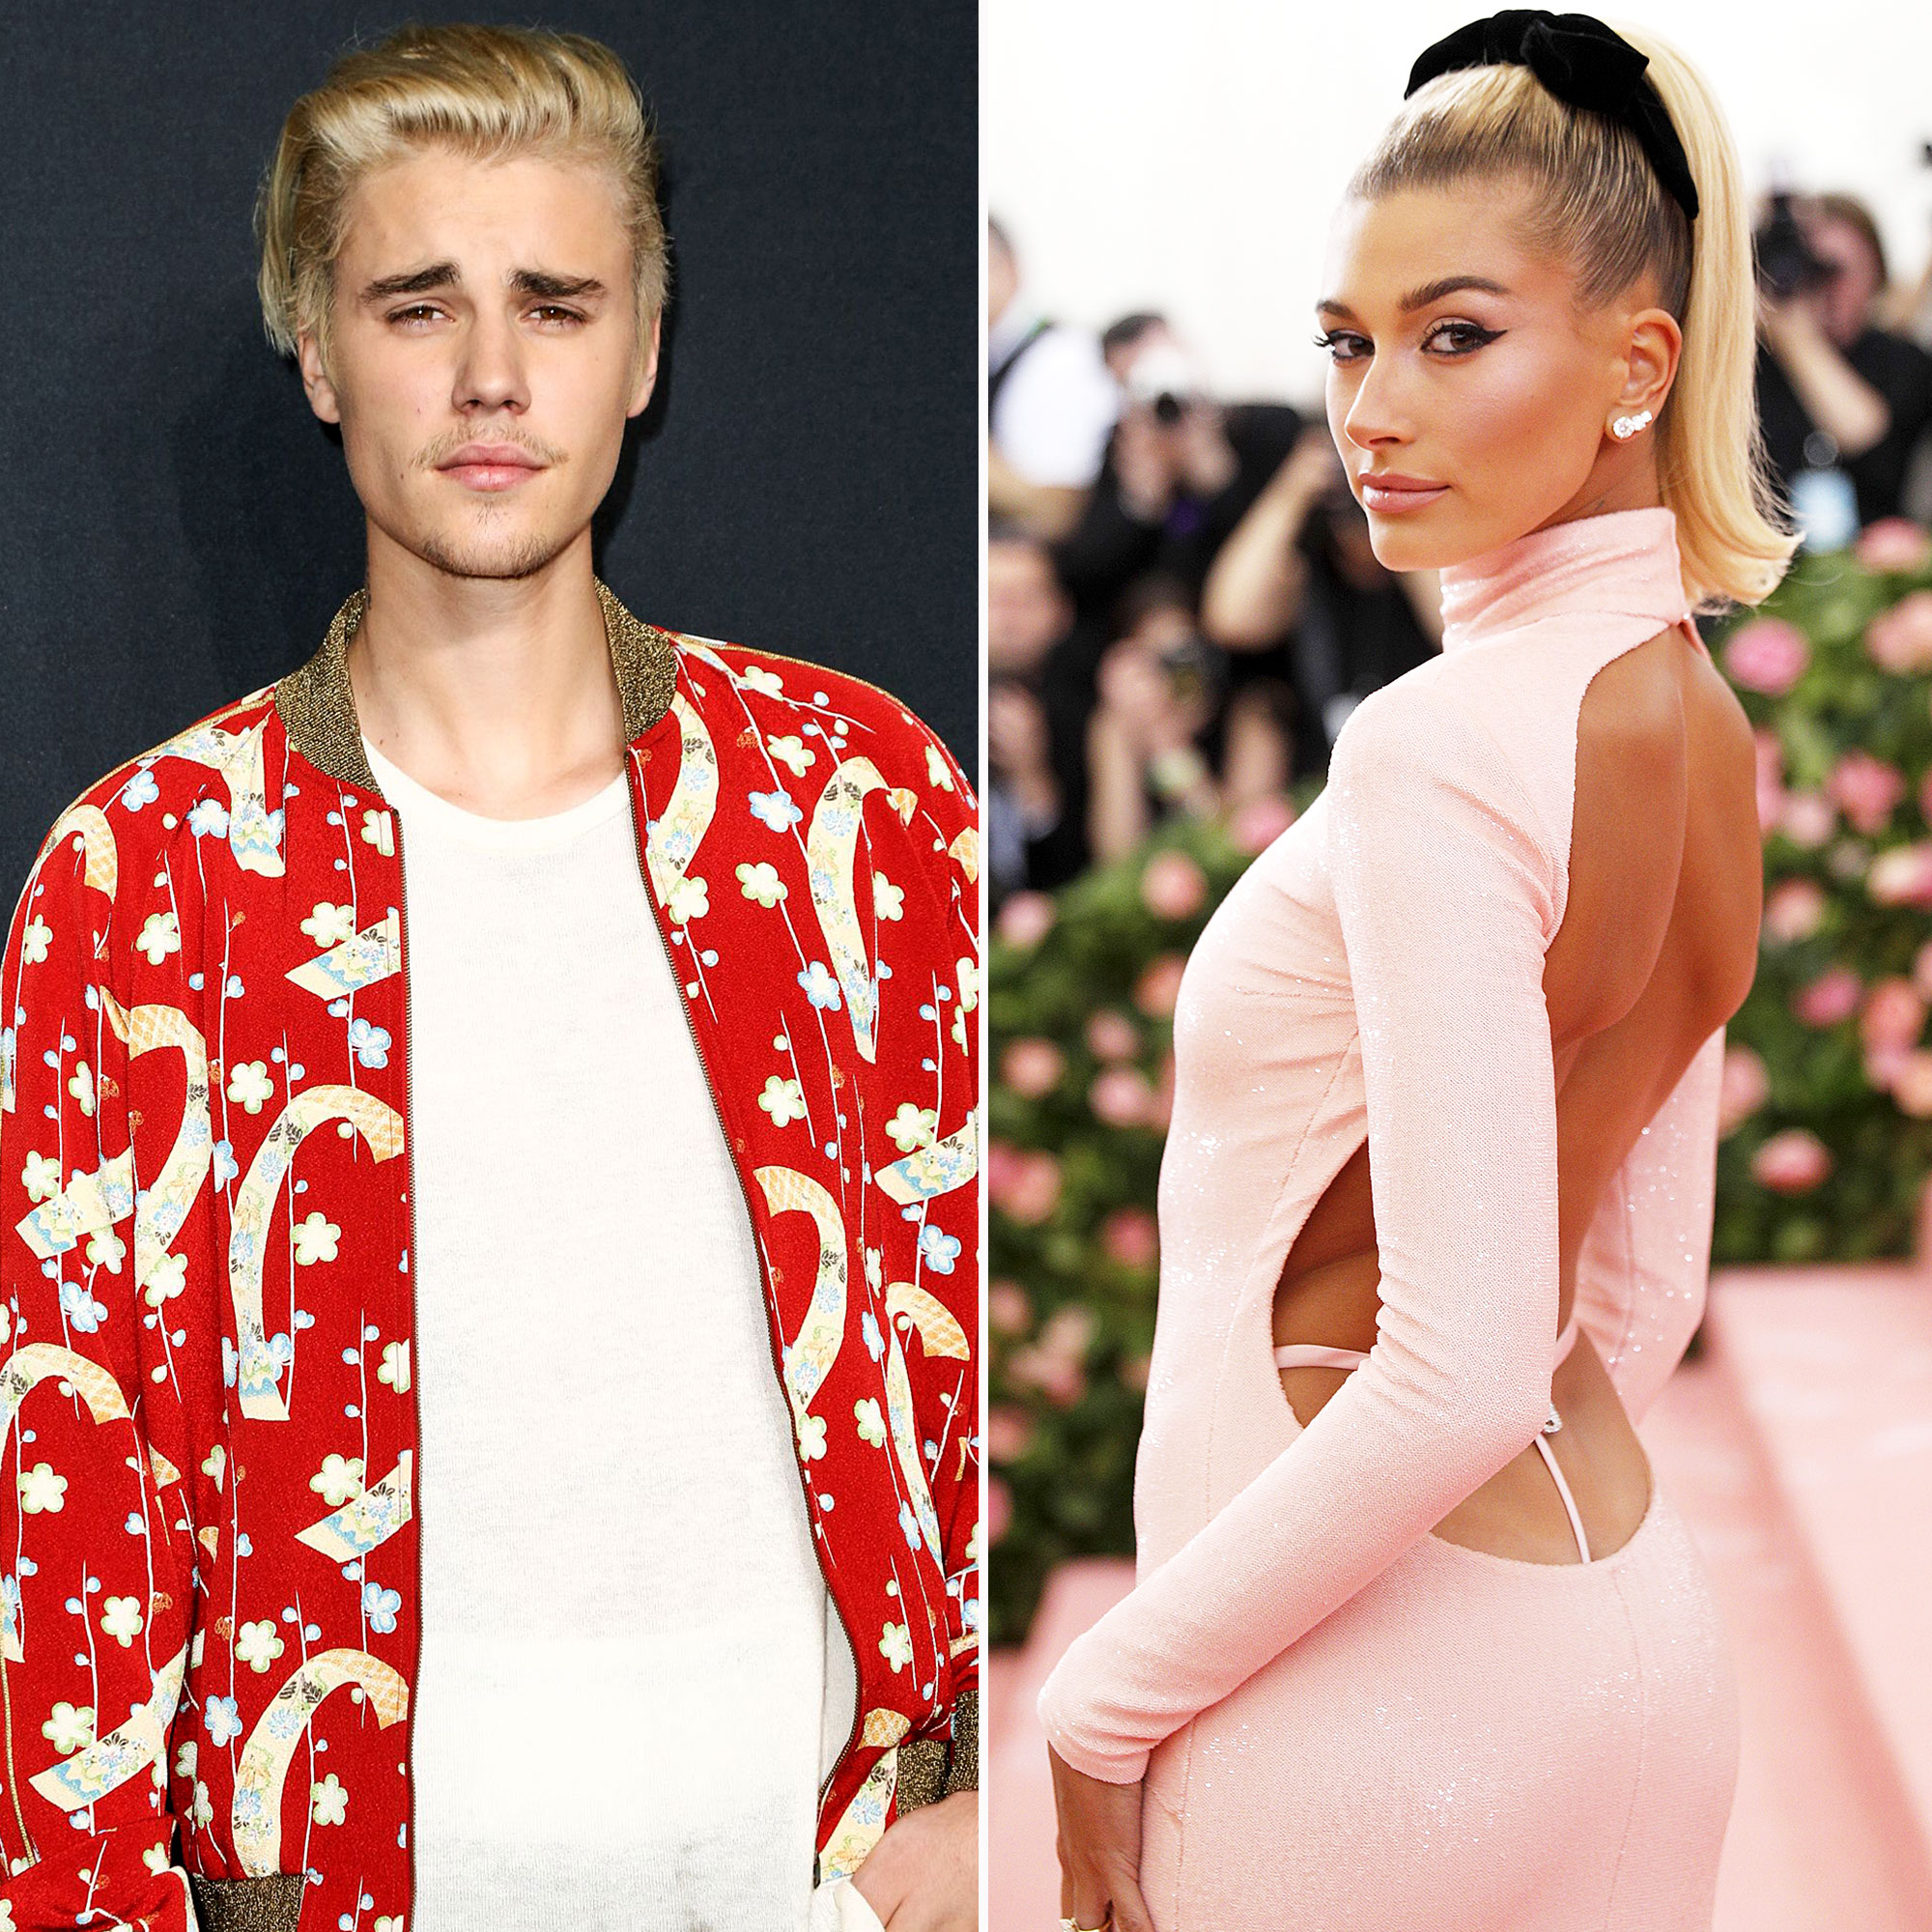 Why Justin Bieber Wanted Small 2nd Wedding To Hailey Bieber